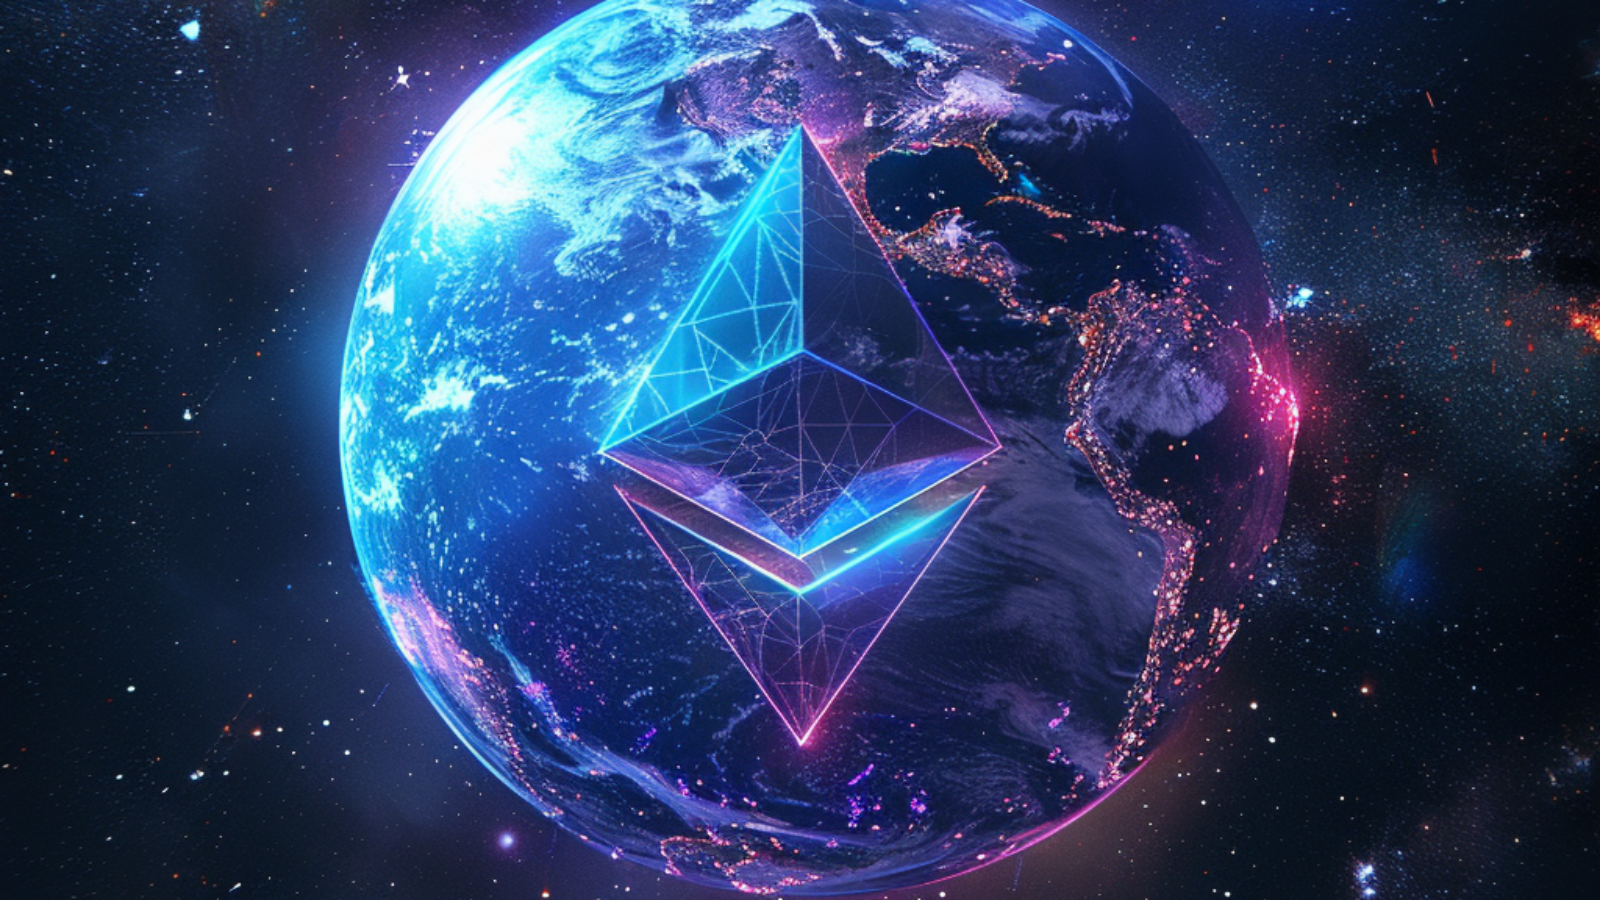 trademegacity_a_virtual_replica_of_earth_with_a_ethereum_sign_a_af05ca5b-1d5b-4e38-bc17-27b90816964a